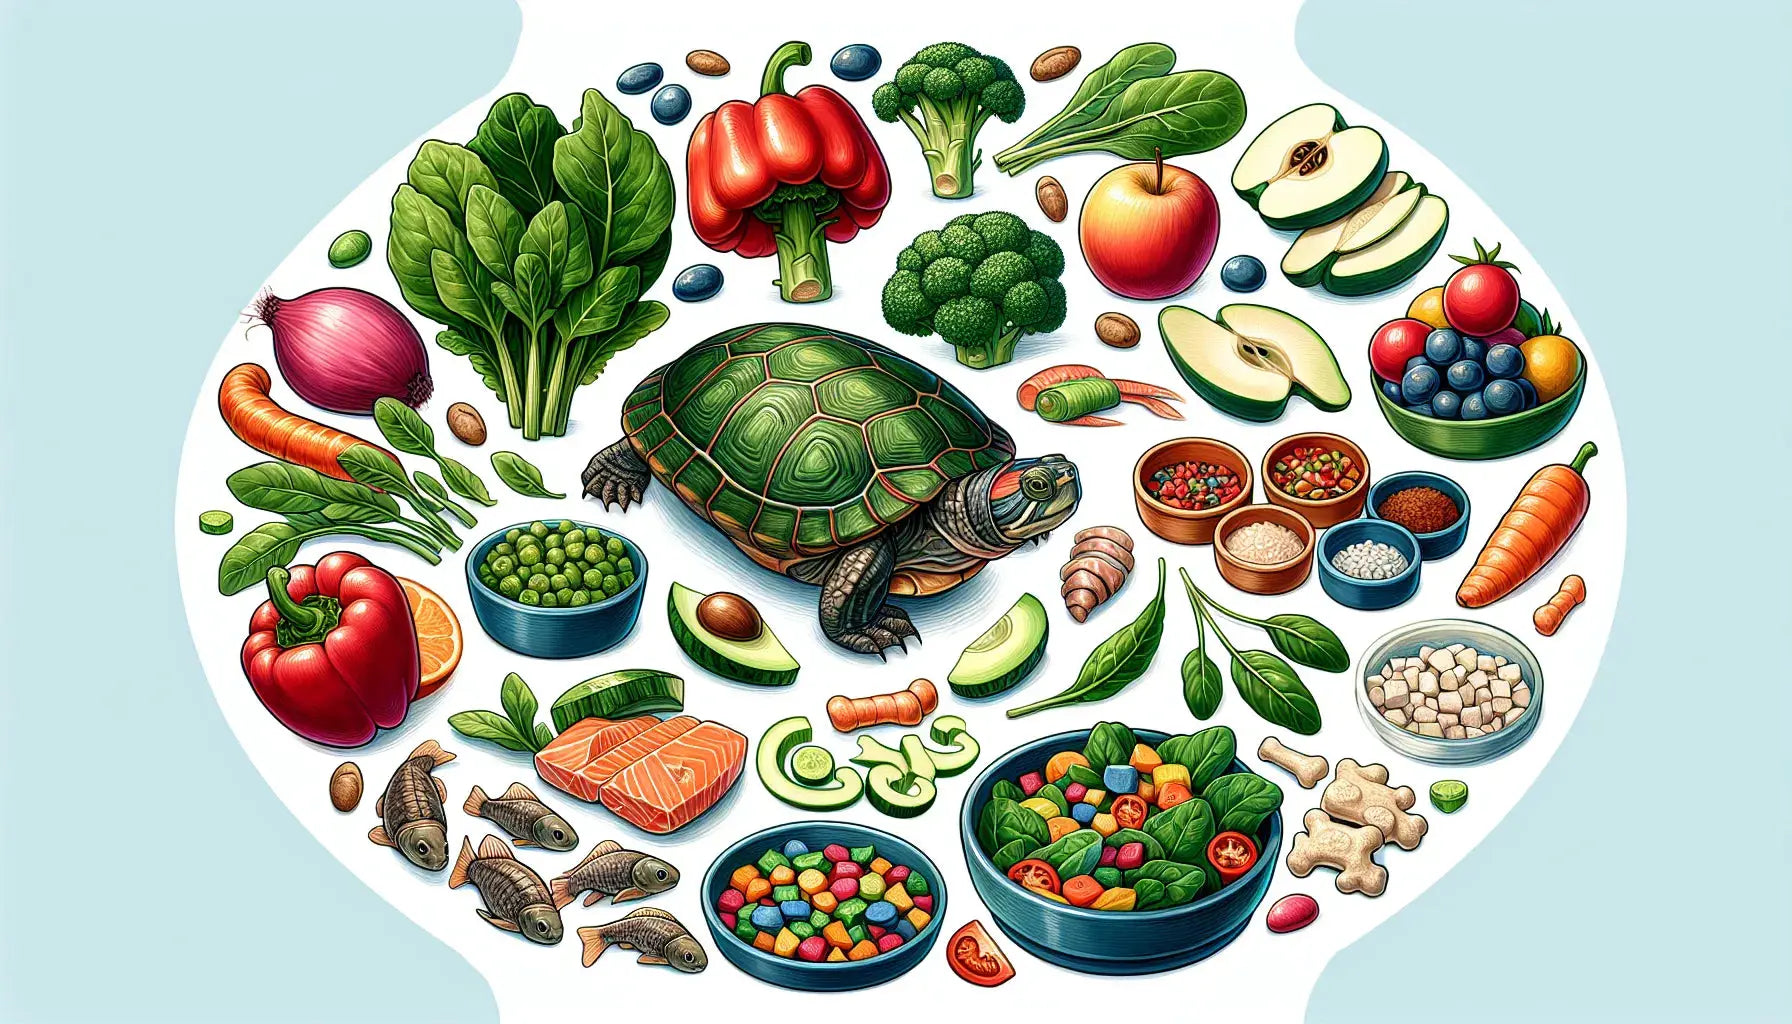 10 Nutritious Foods for Your Pet Turtle's Diet